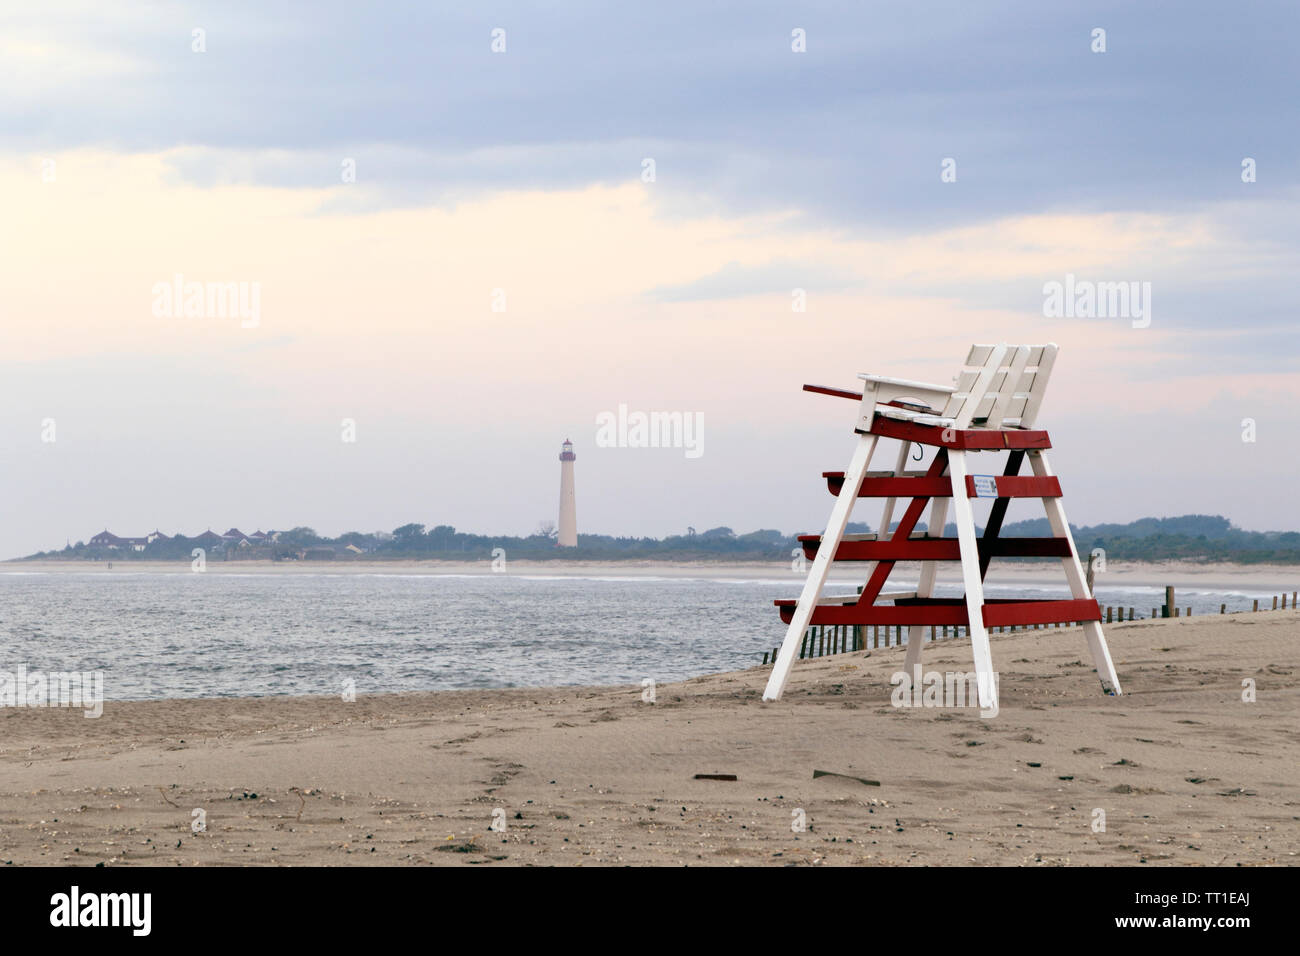 A lifeguard's chair on the beach with the Cape May Lighthouse in the background, Cape May, New Jersey, USA Stock Photo